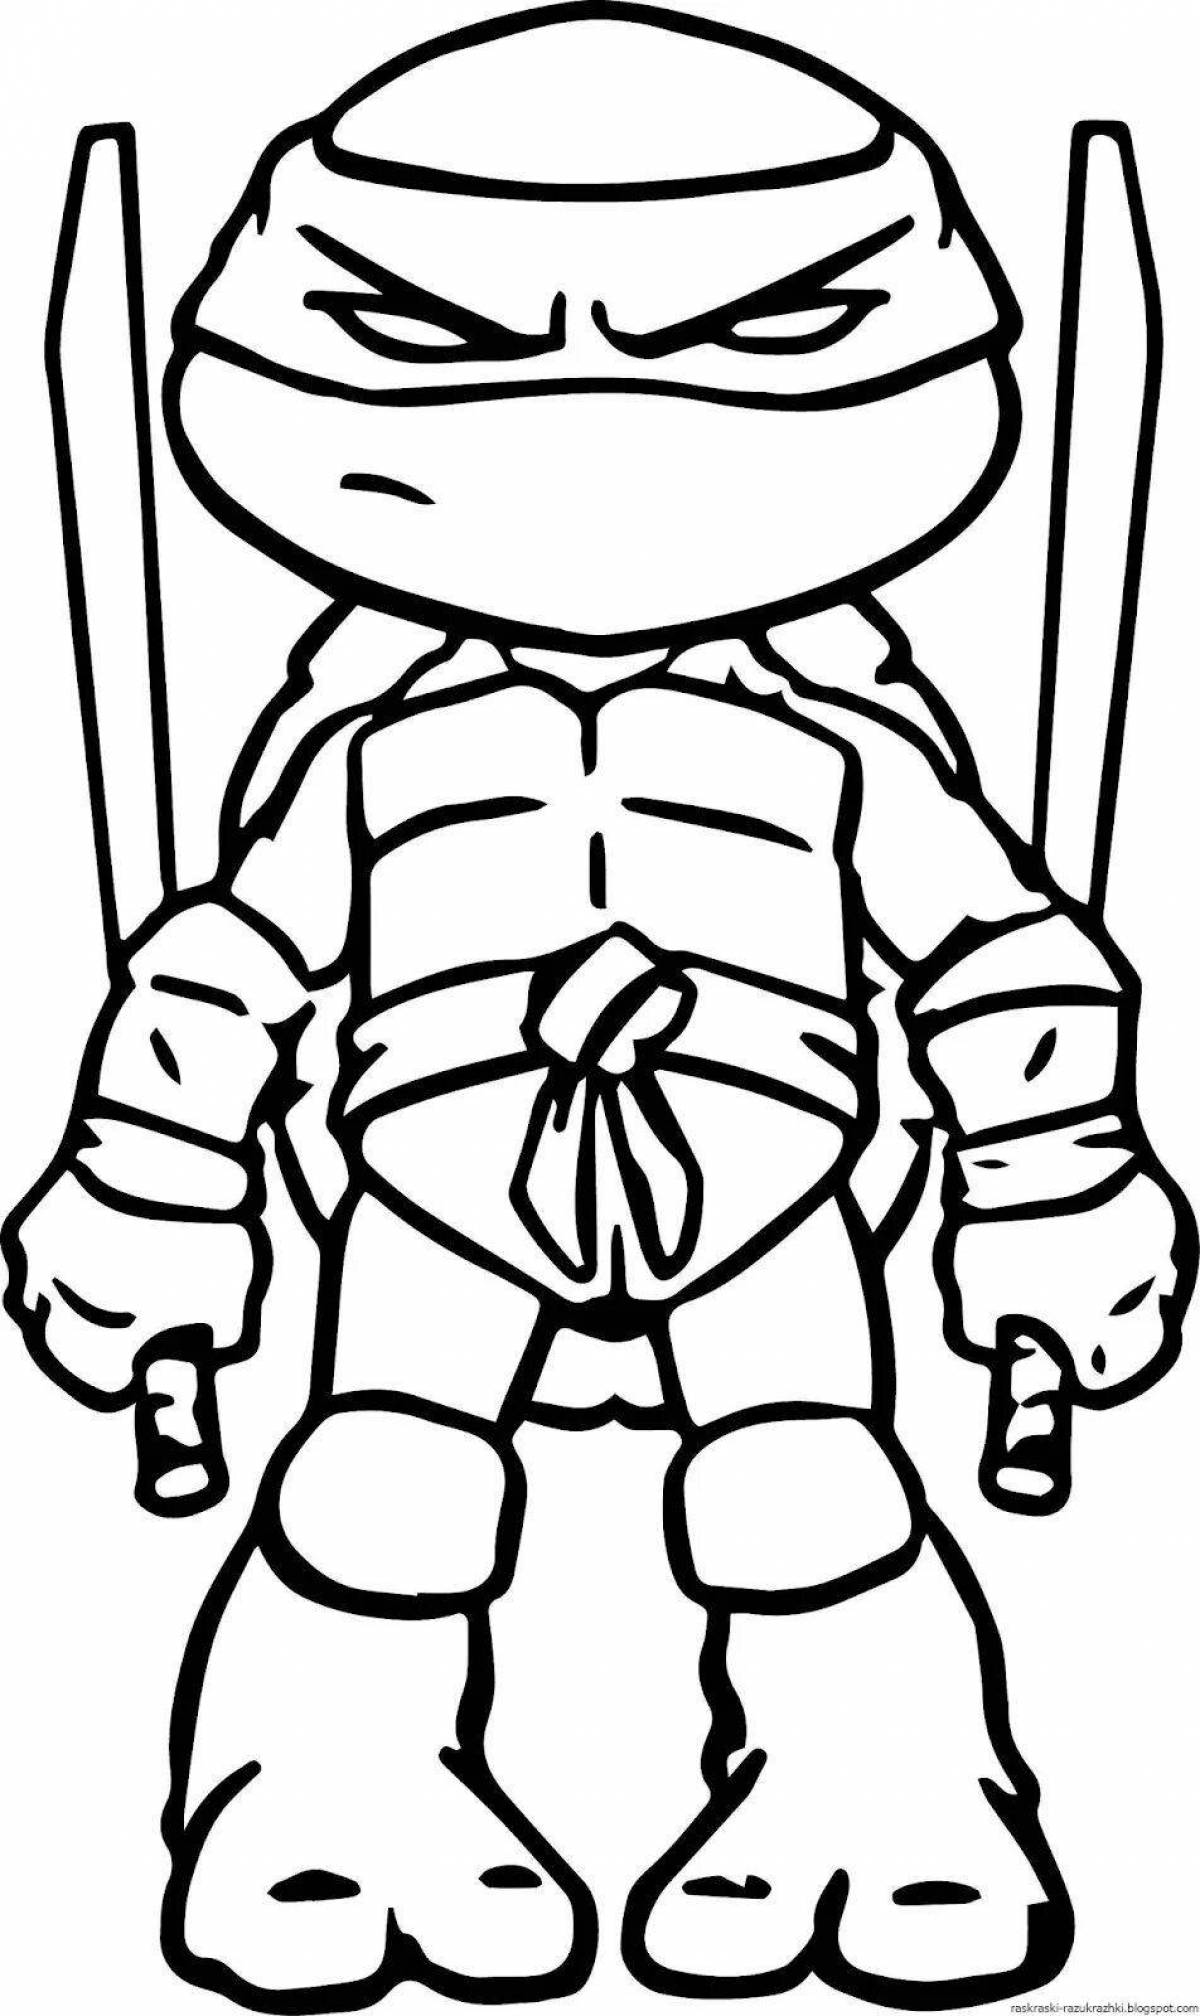 Glorious ninja coloring pages for kids